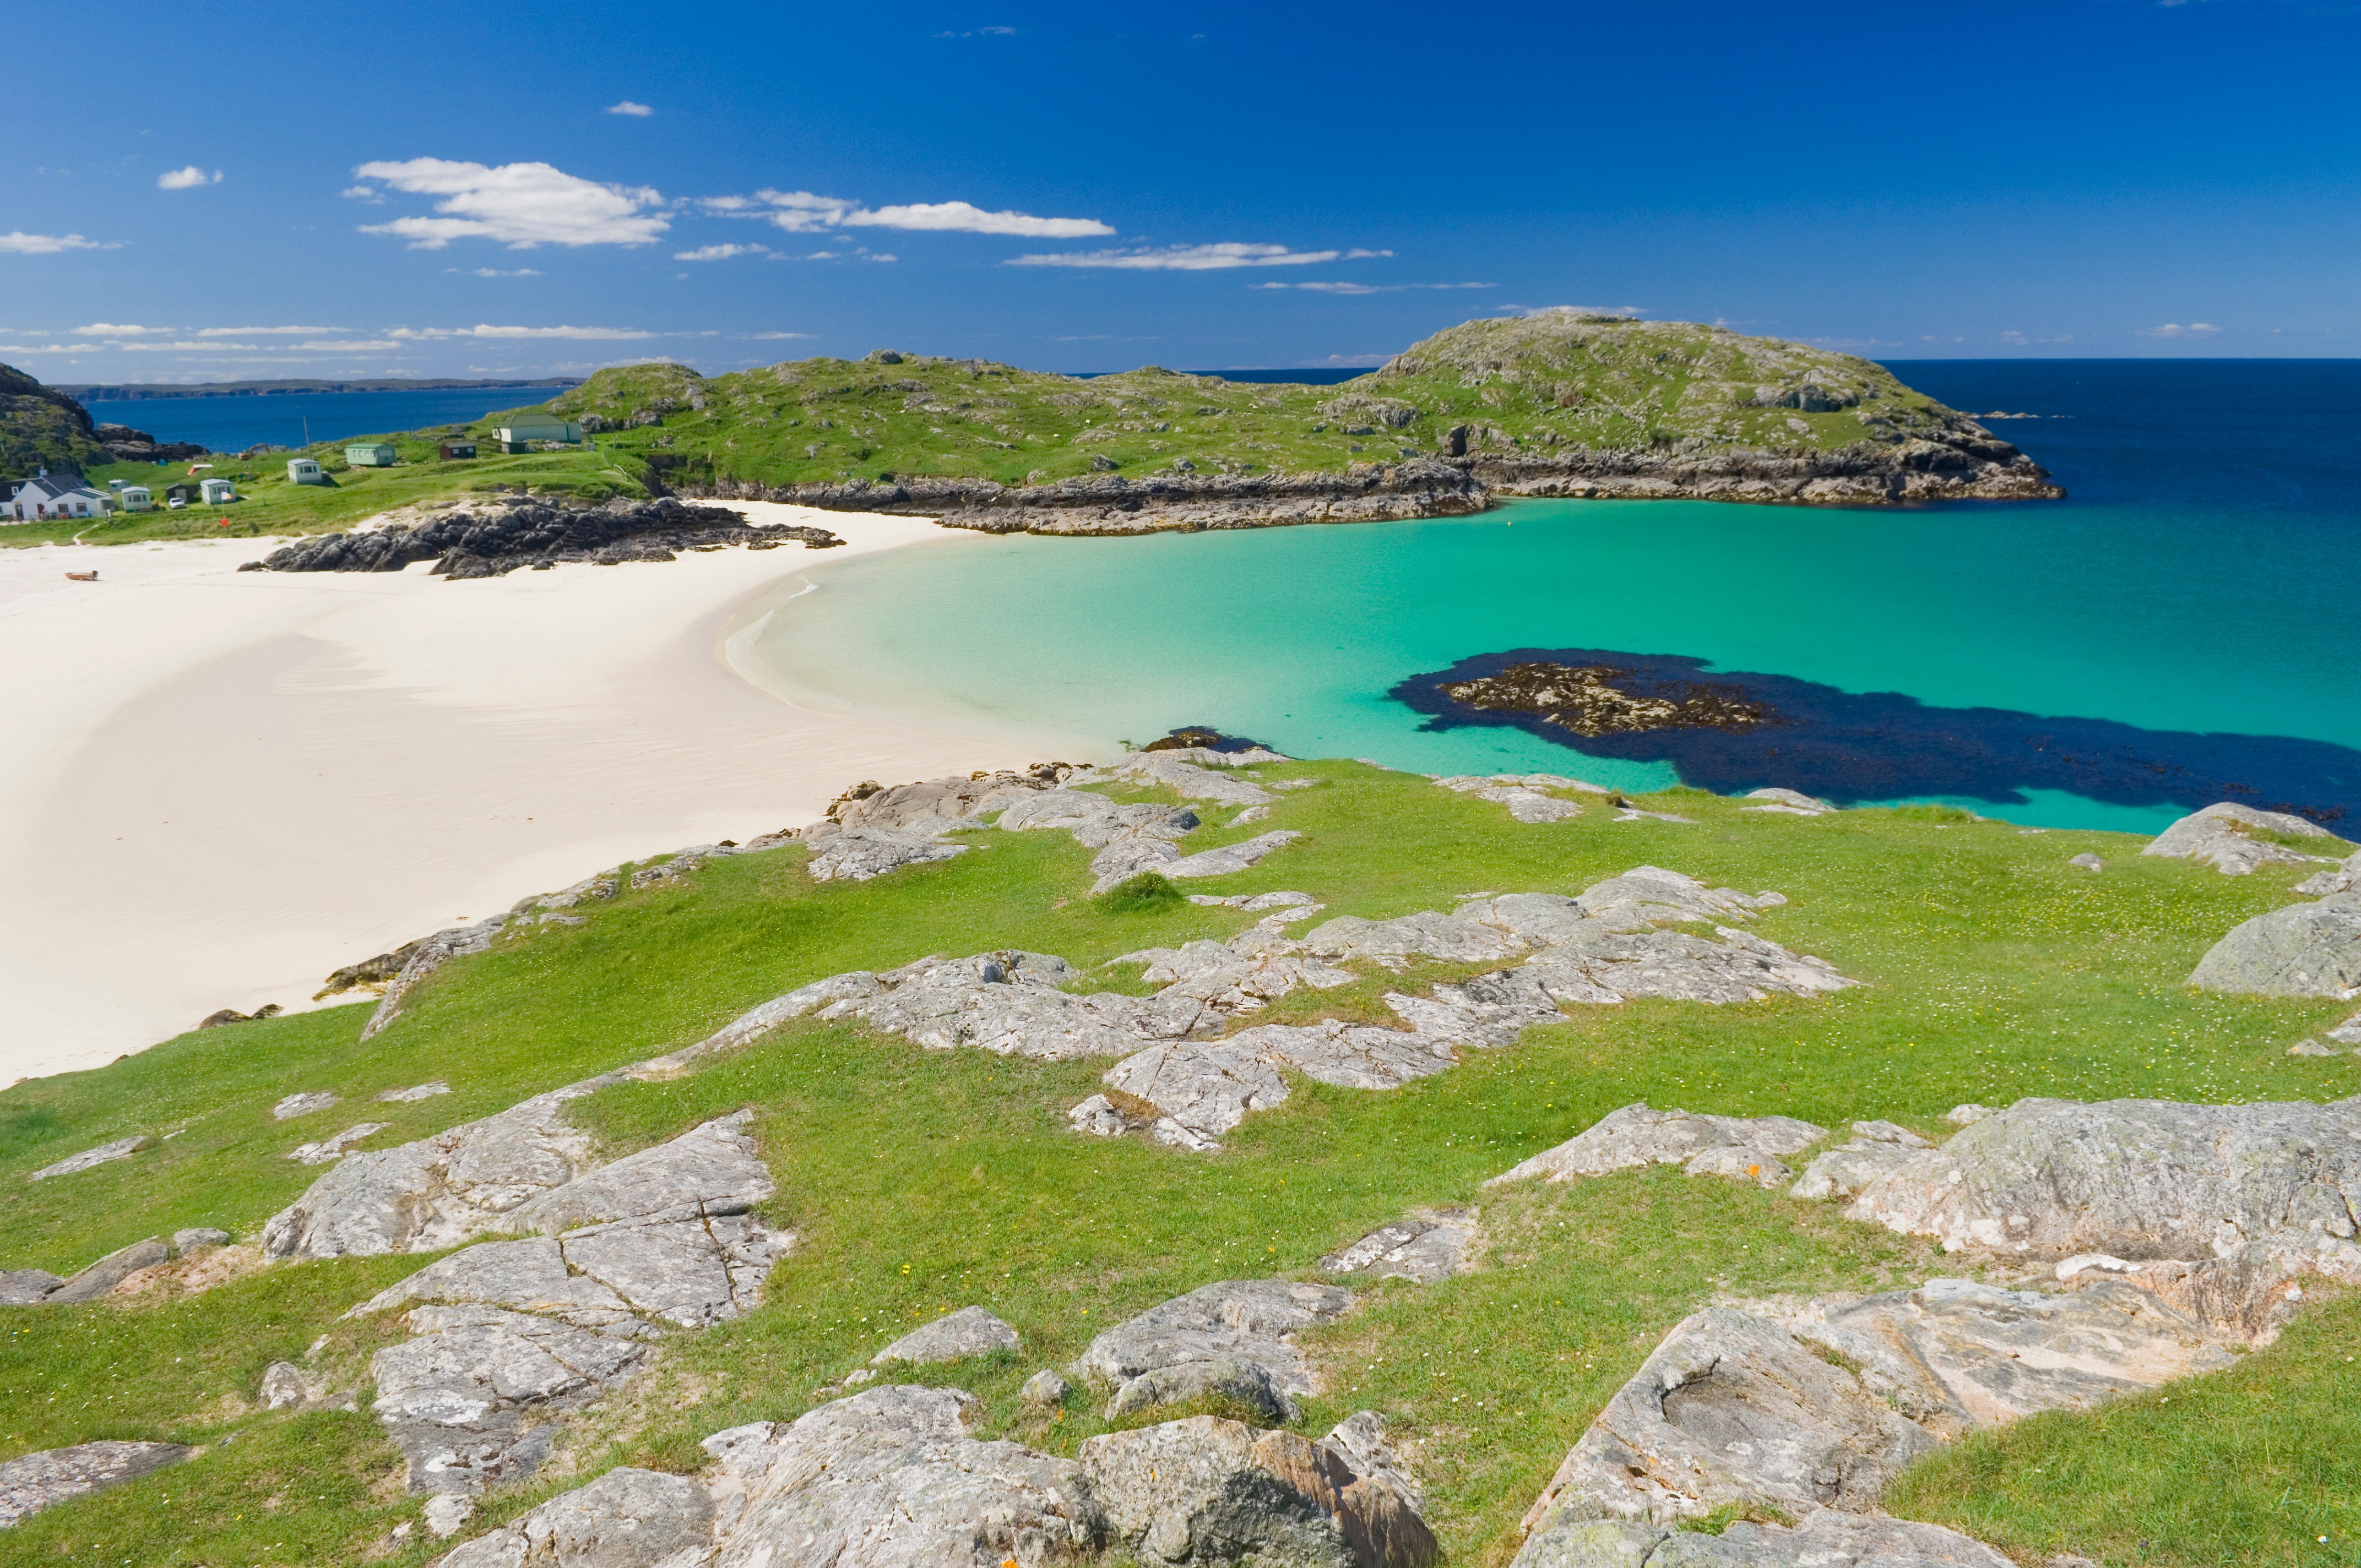 The Scottish Highlands make for a great beach trip in the summer months